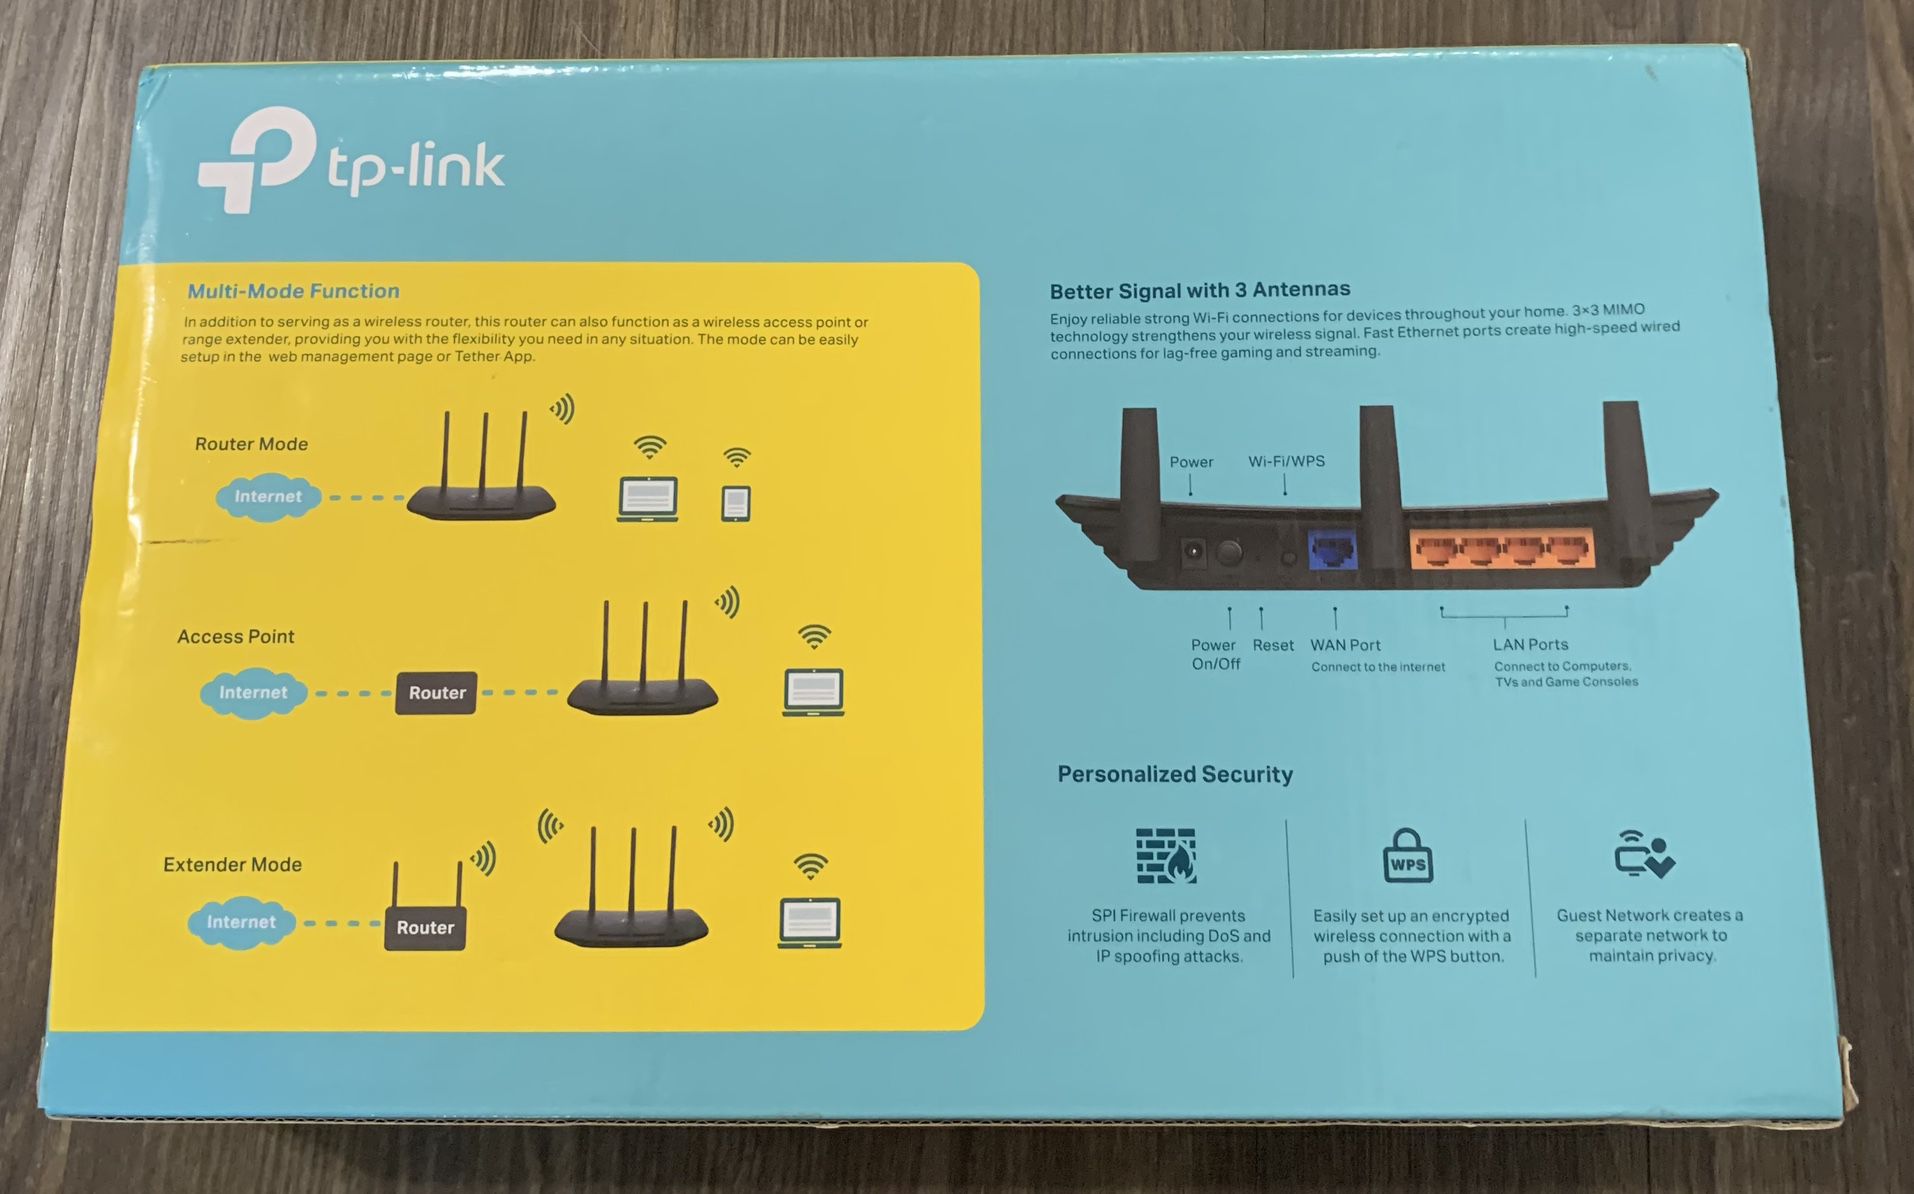 TP-Link N450 WiFi Router - Wireless Internet Router for Home (TL-WR940N) & TP-Link 5 Port